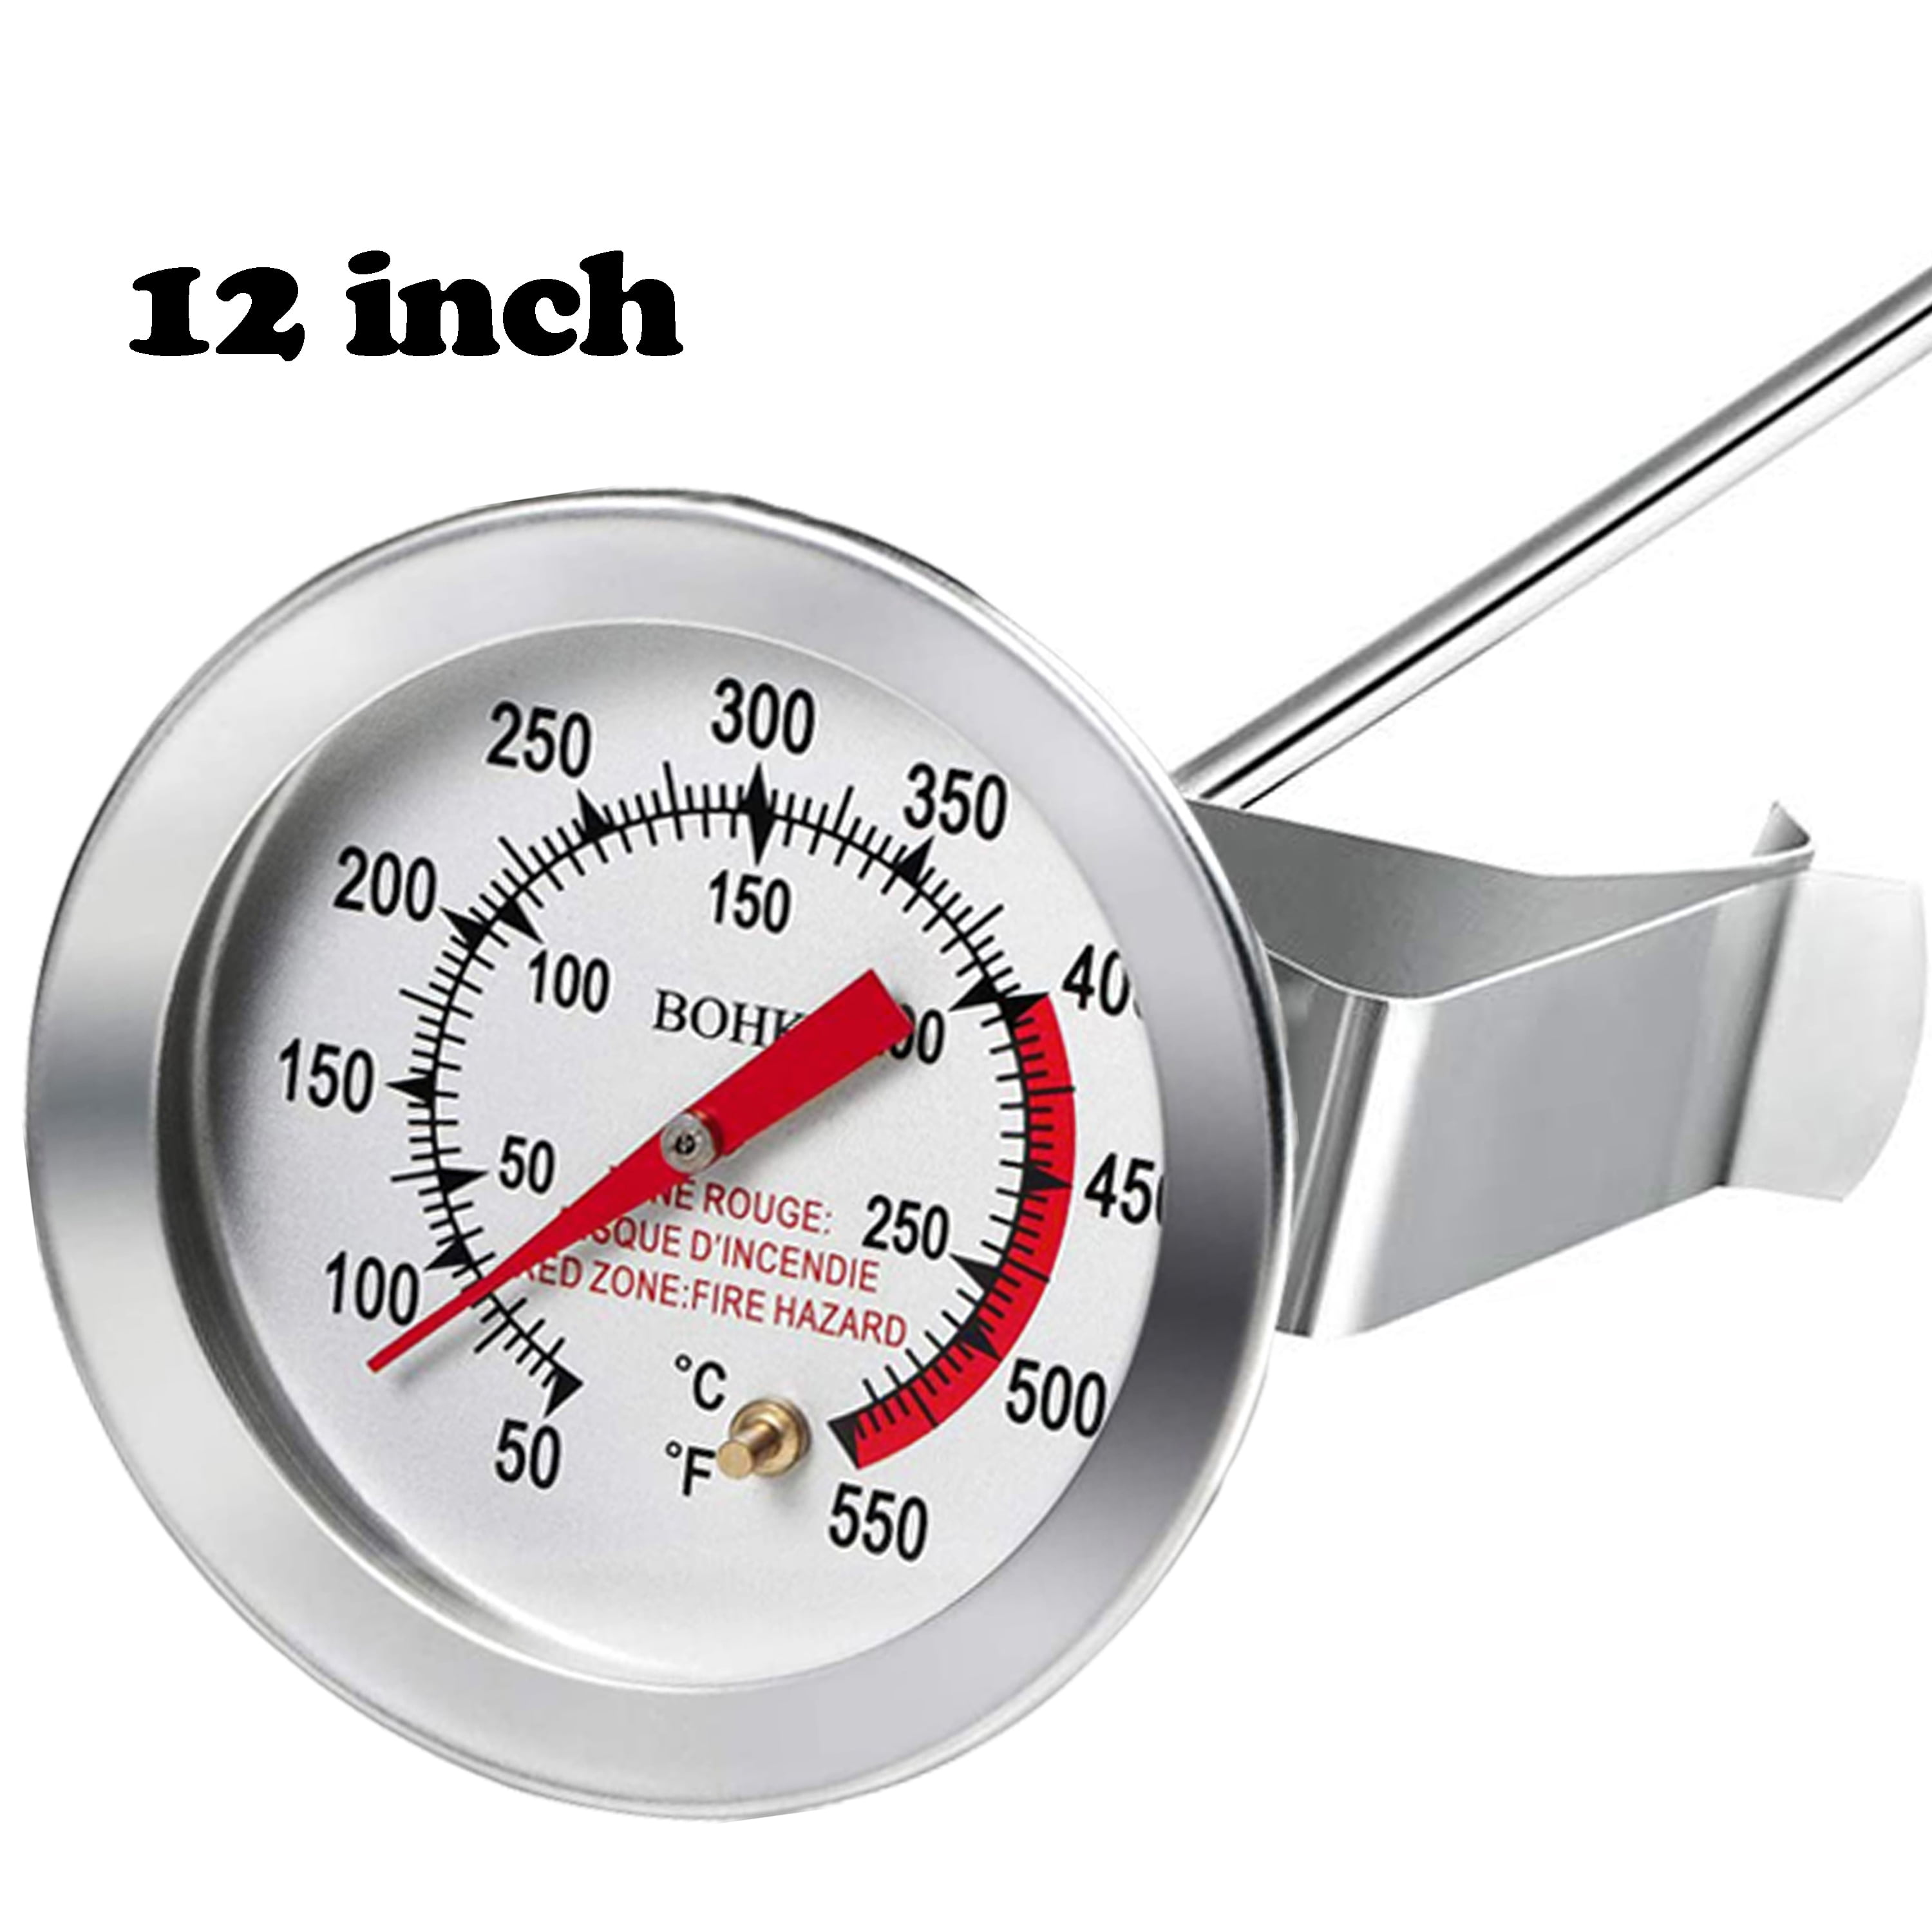 Stainless Steel Oven BBQ Cooking Probe Thermometer Food Meat Gauge 200°C 